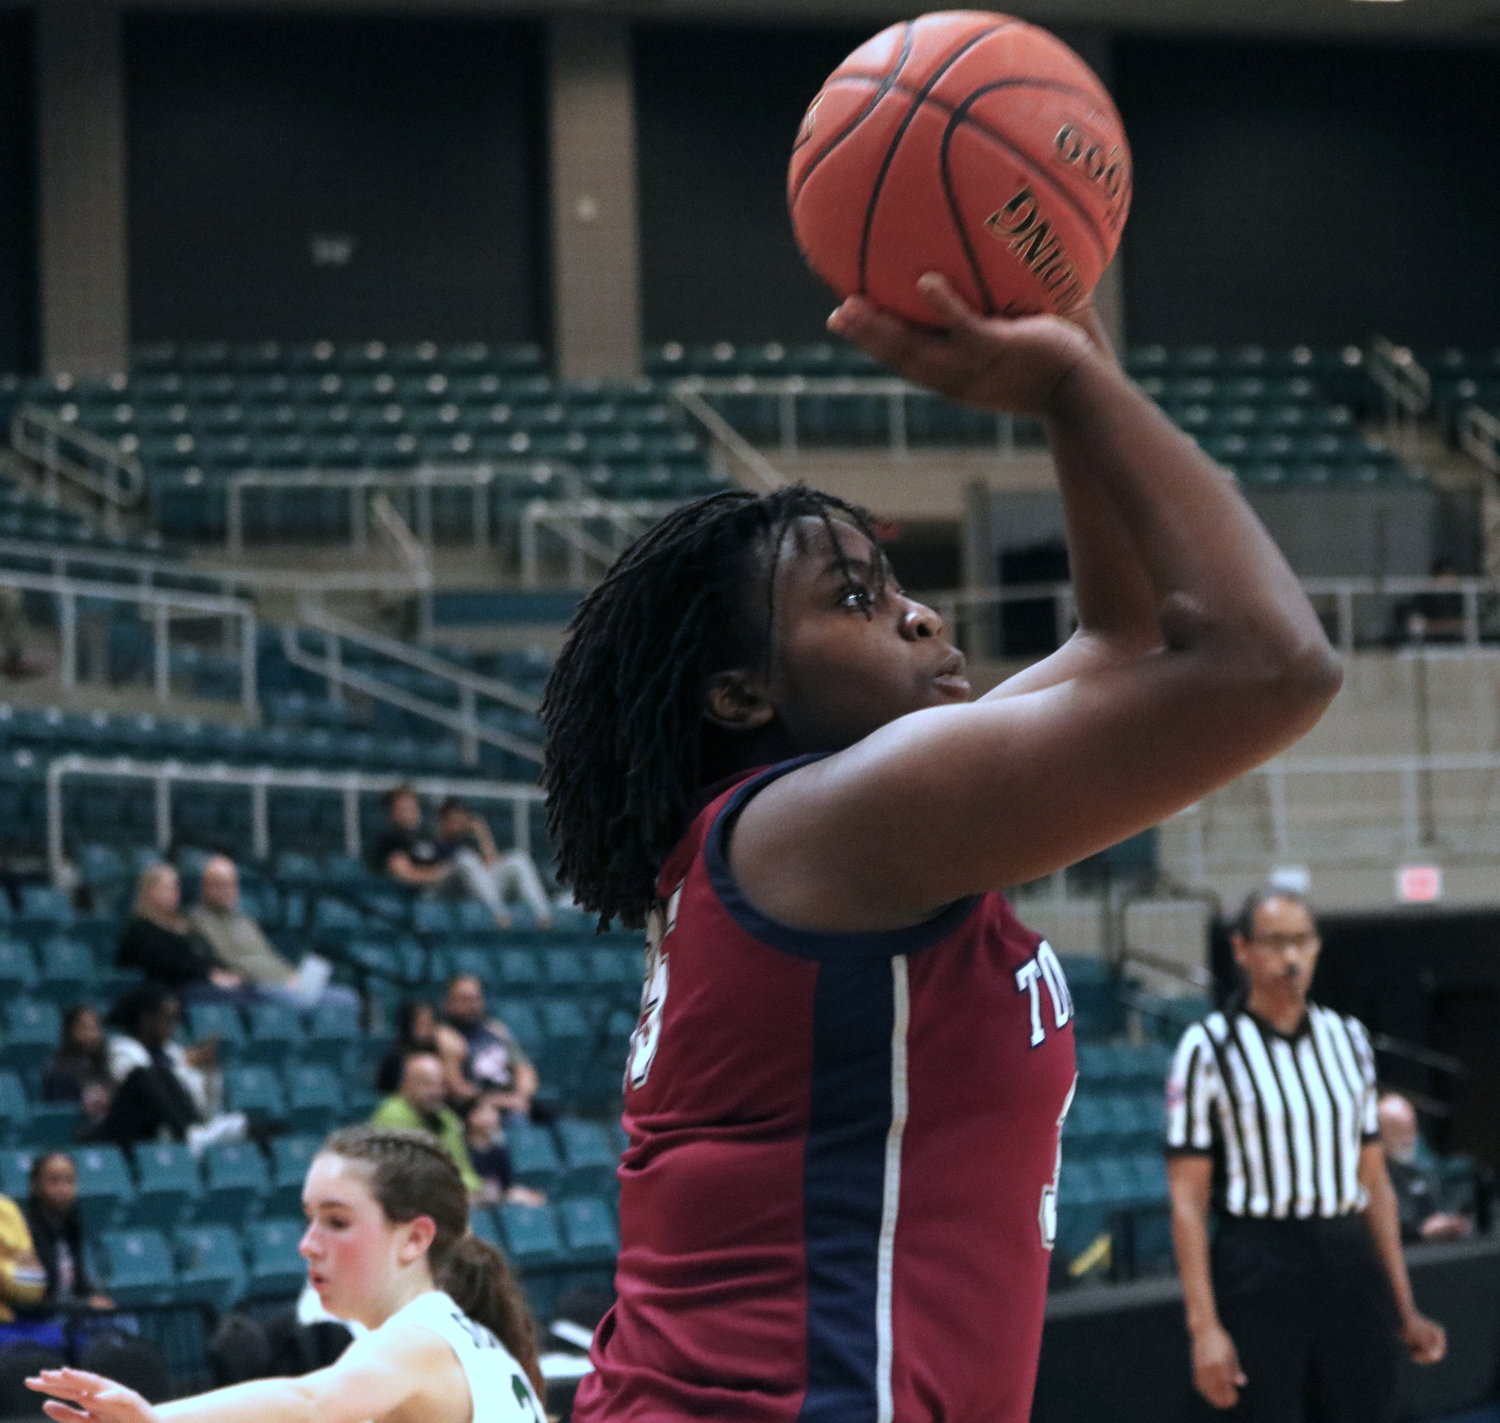 Fiyin Adeleye shoots a shot during Friday’s game between Tompkins and Stratford at the Merrell Center.